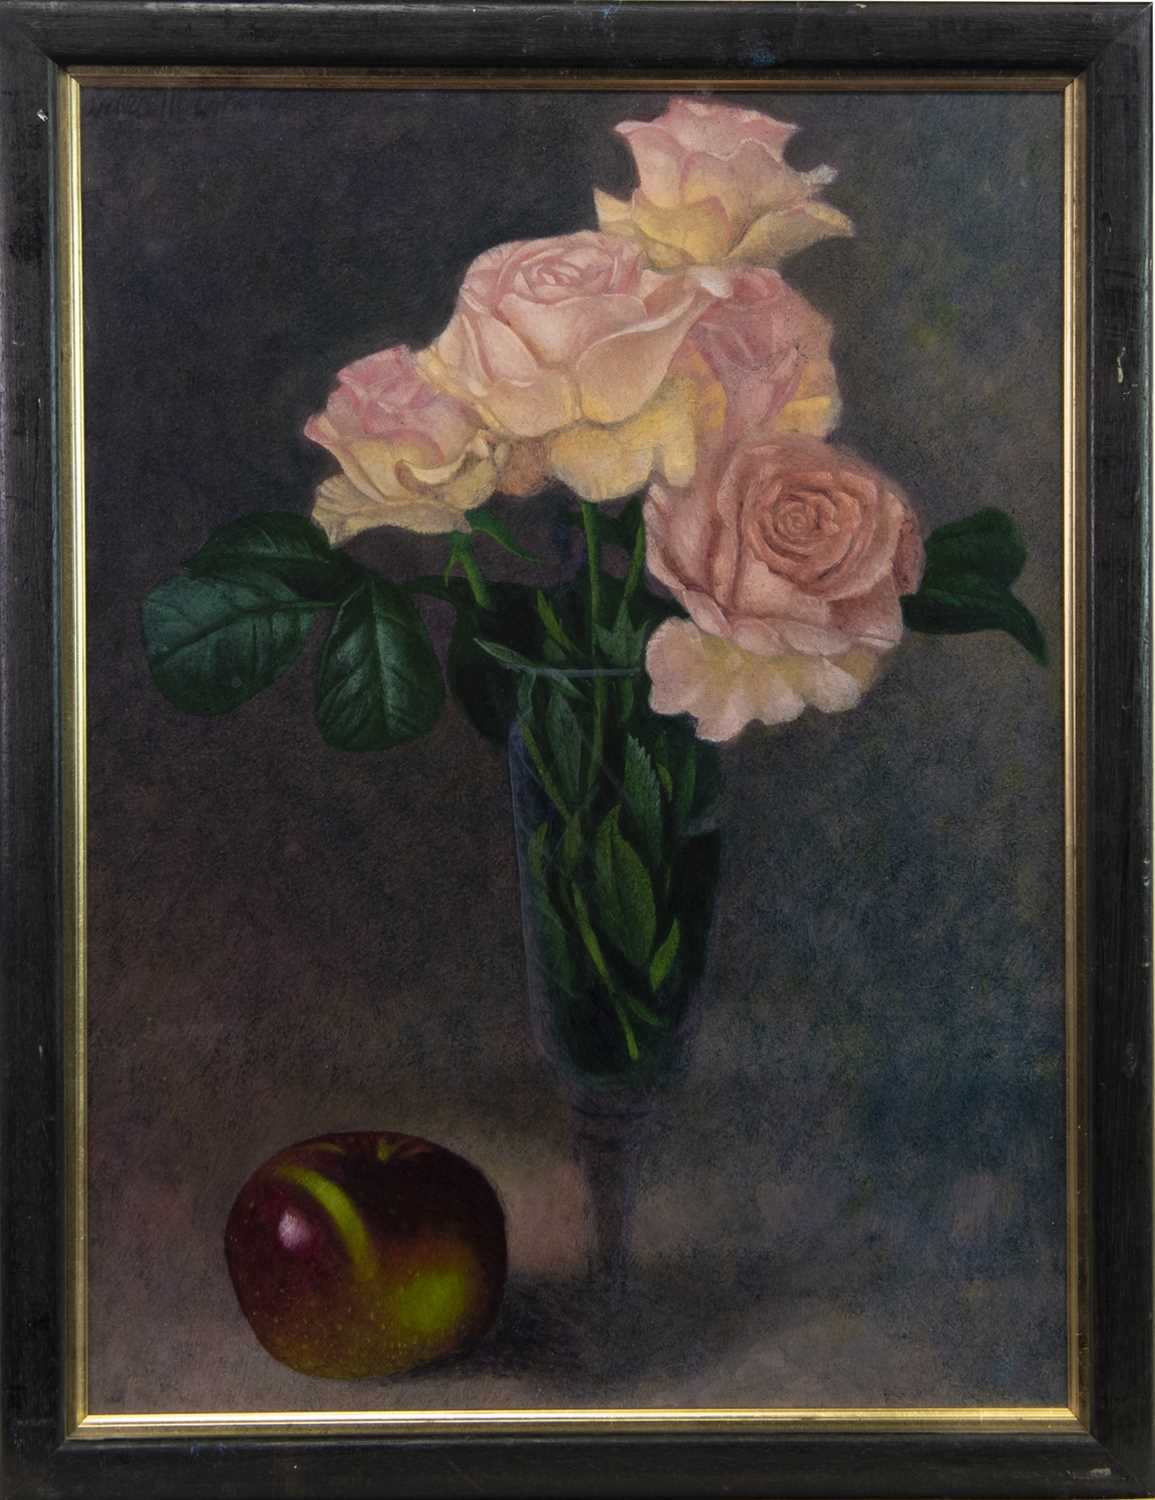 Lot 658 - APPLES AND ROSES, AN OIL BY JAMES MCDONALD